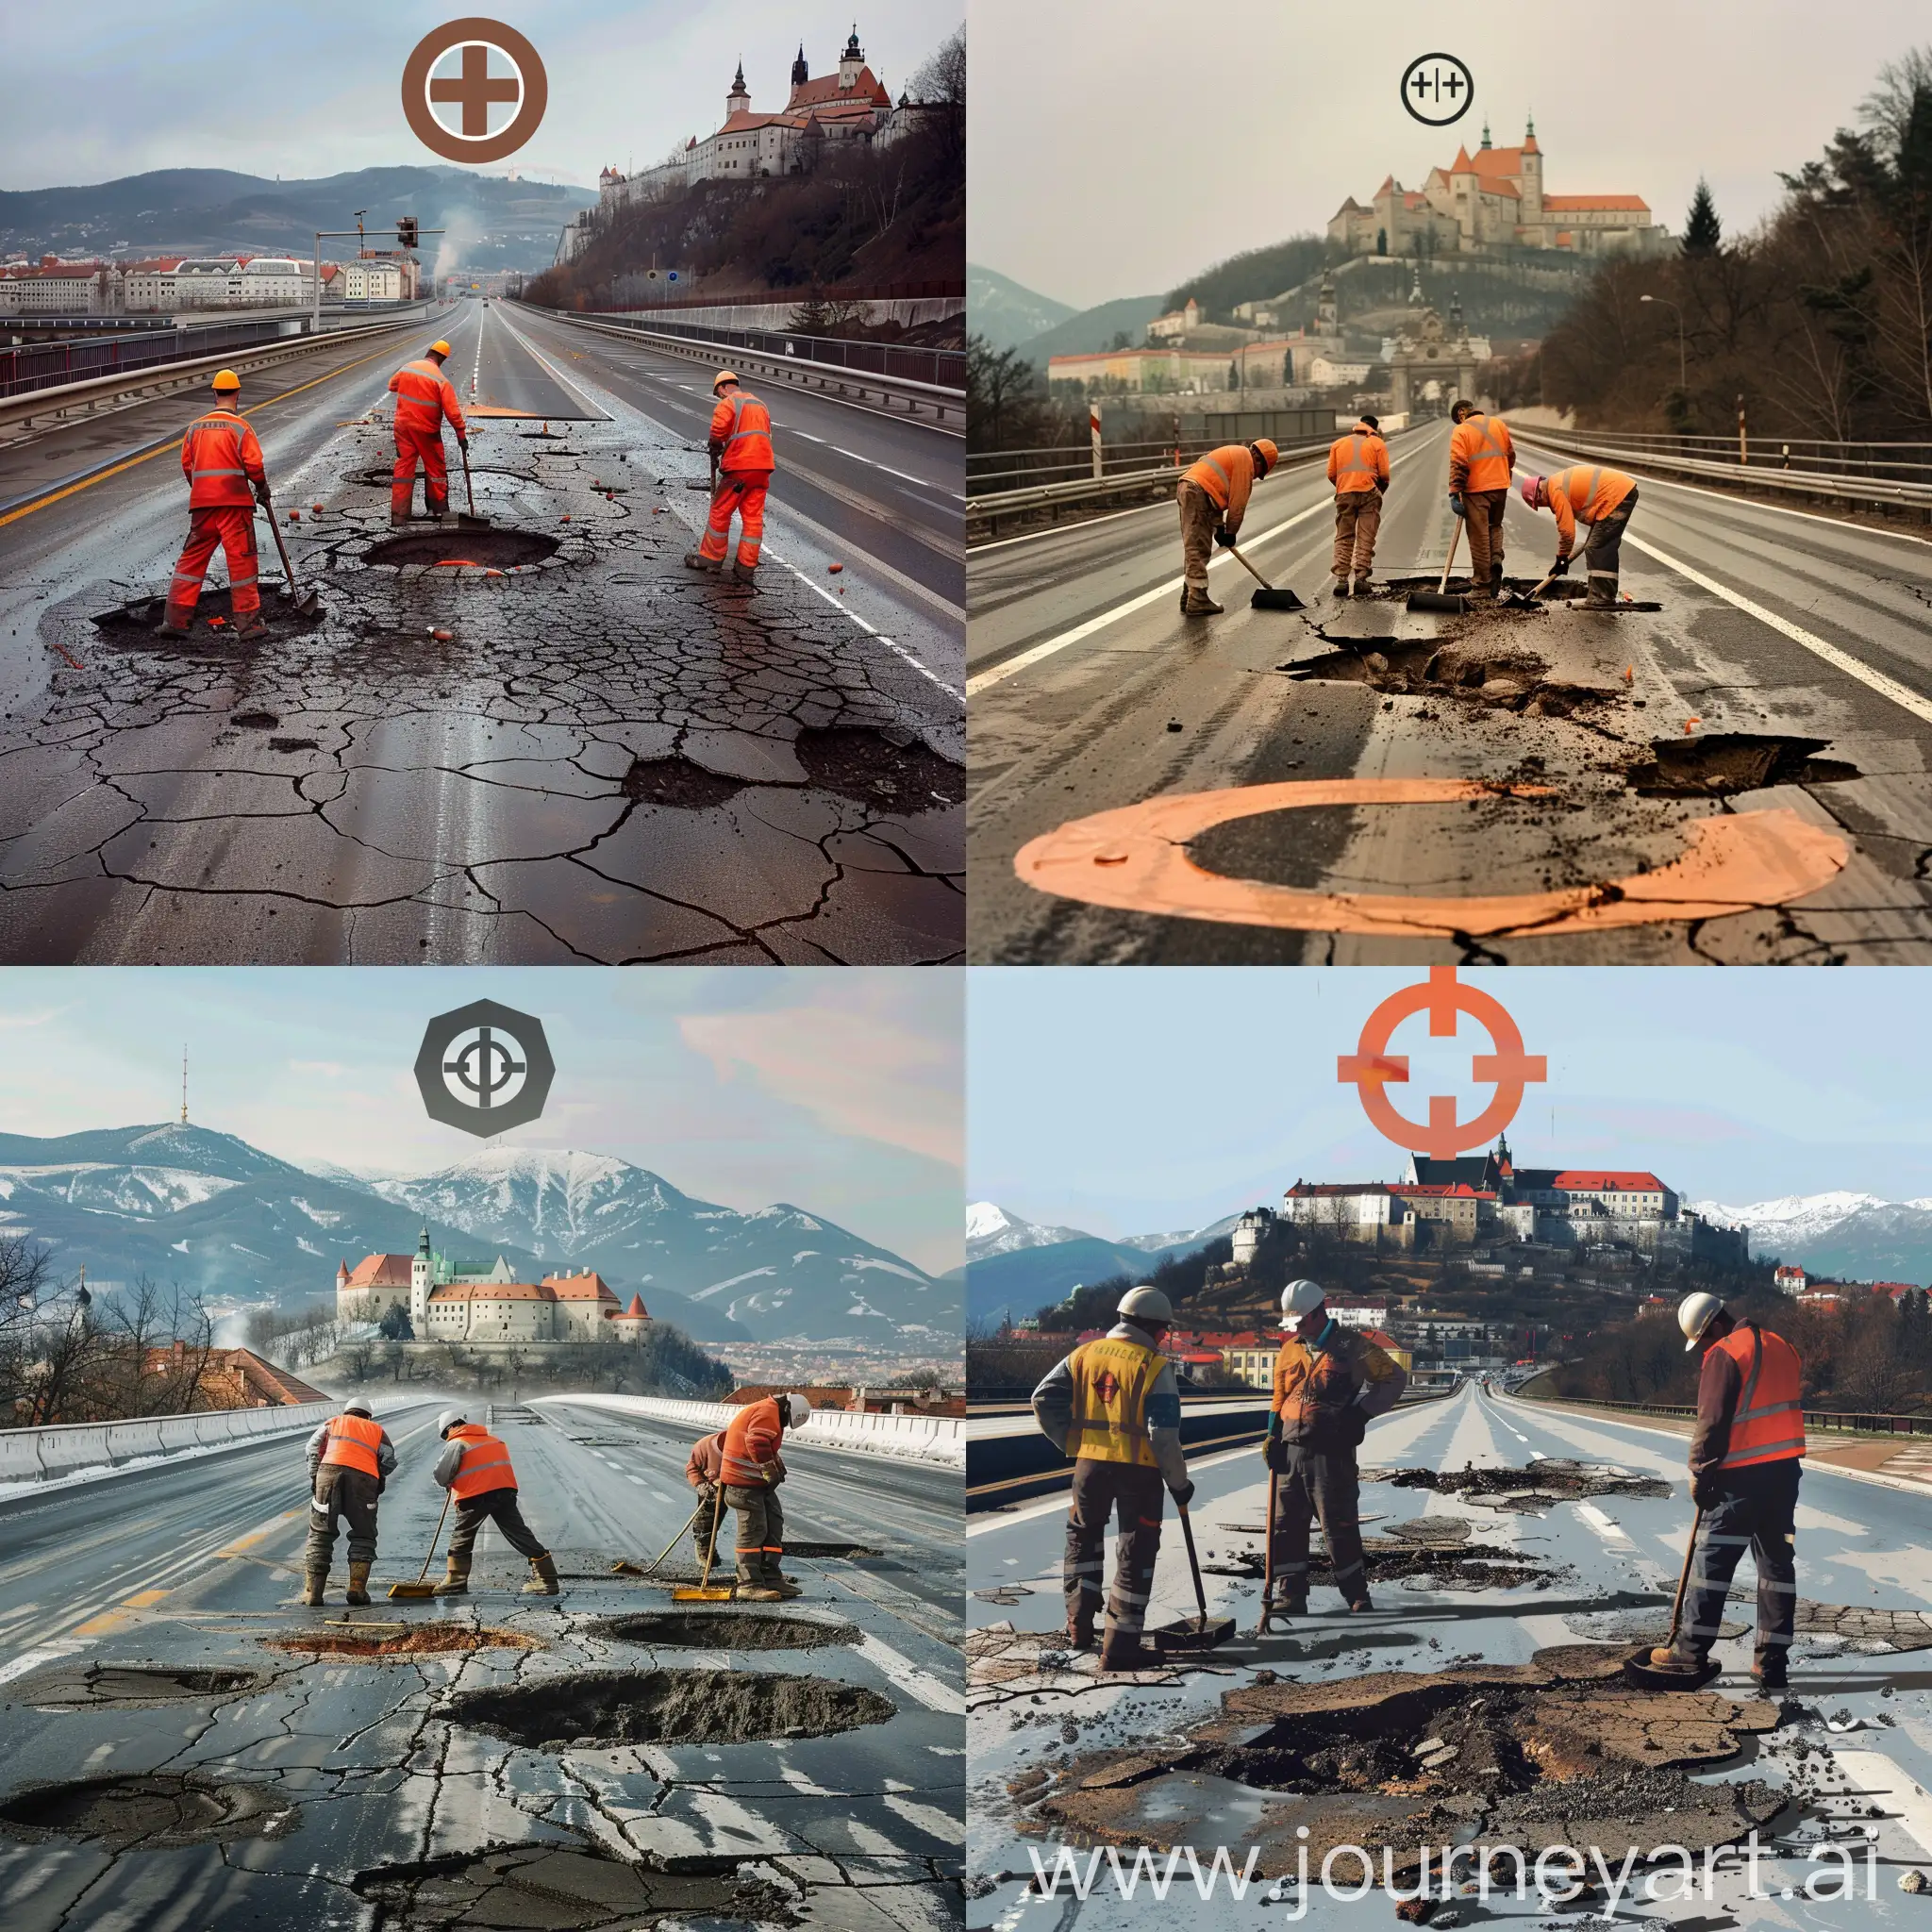 Road-Workers-Repairing-Potholes-on-Highway-with-Bratislava-Castle-and-High-Tatras-in-Background